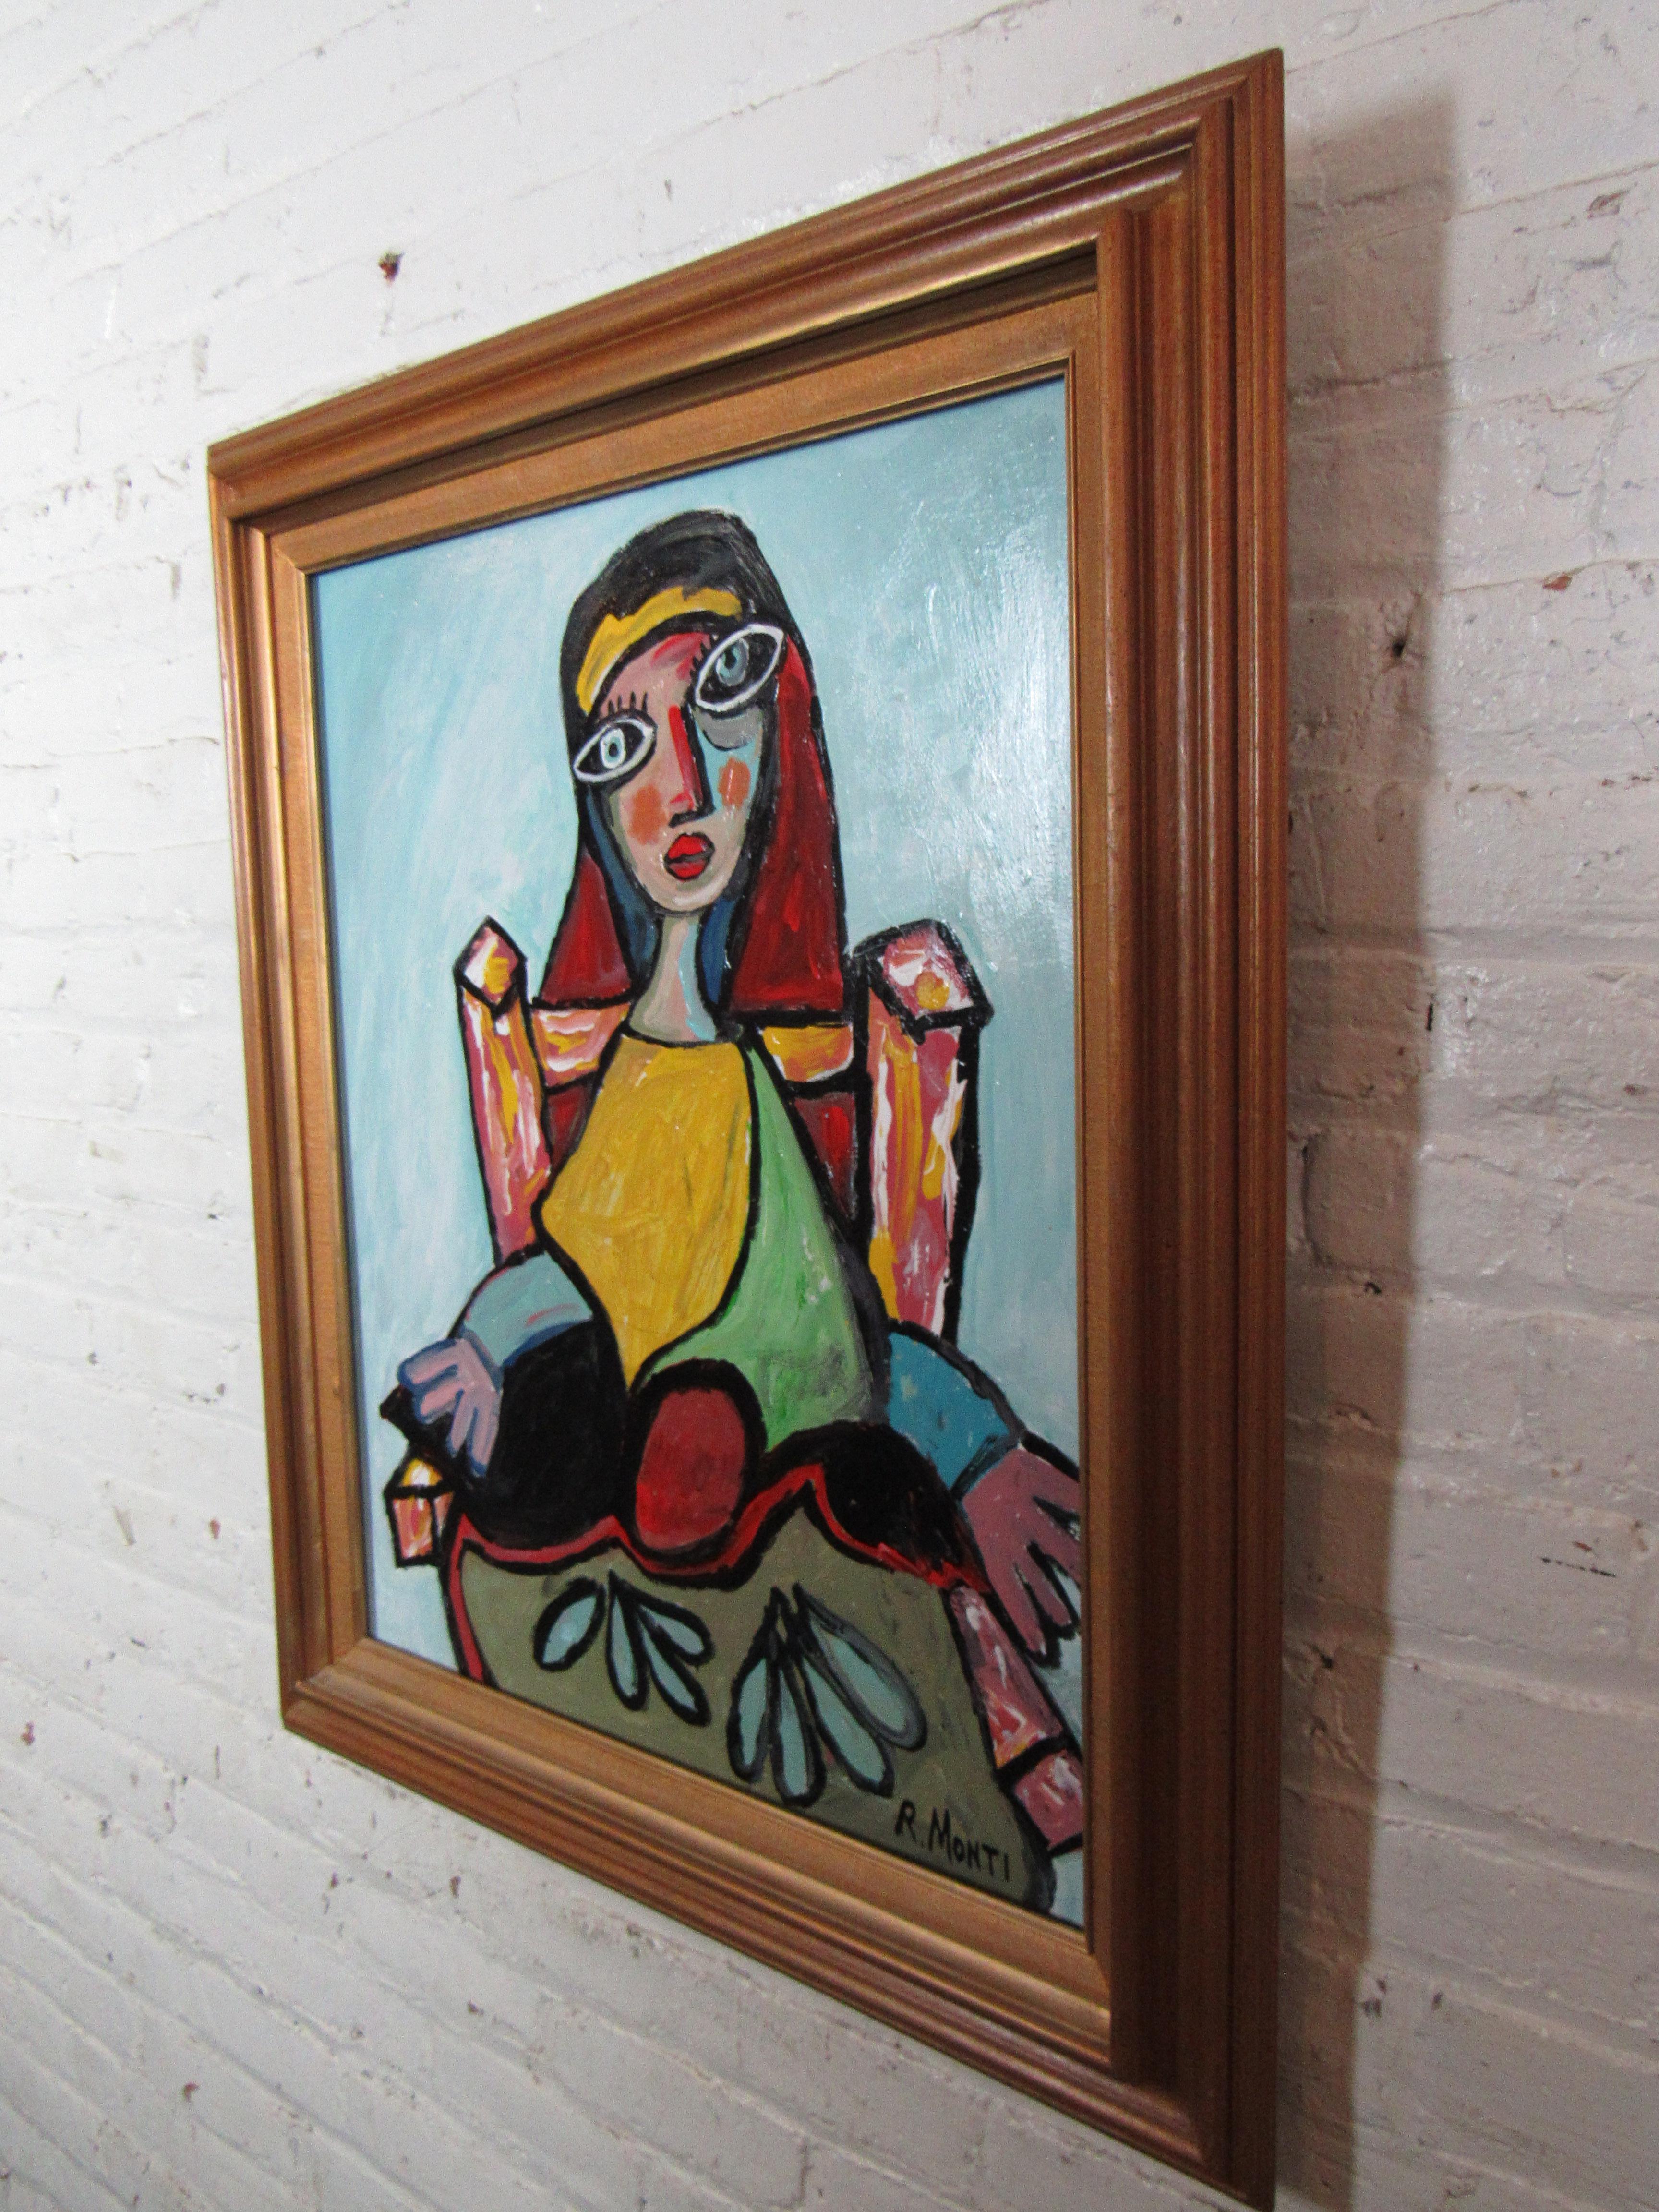 An expressive portrait rendered in thick vibrant oil paint and geometric forms, by Pennsylvania-based artist R. Monti. Signed by the artist and held in an ornate wooden frame. Please confirm item location with seller (NY/NJ).